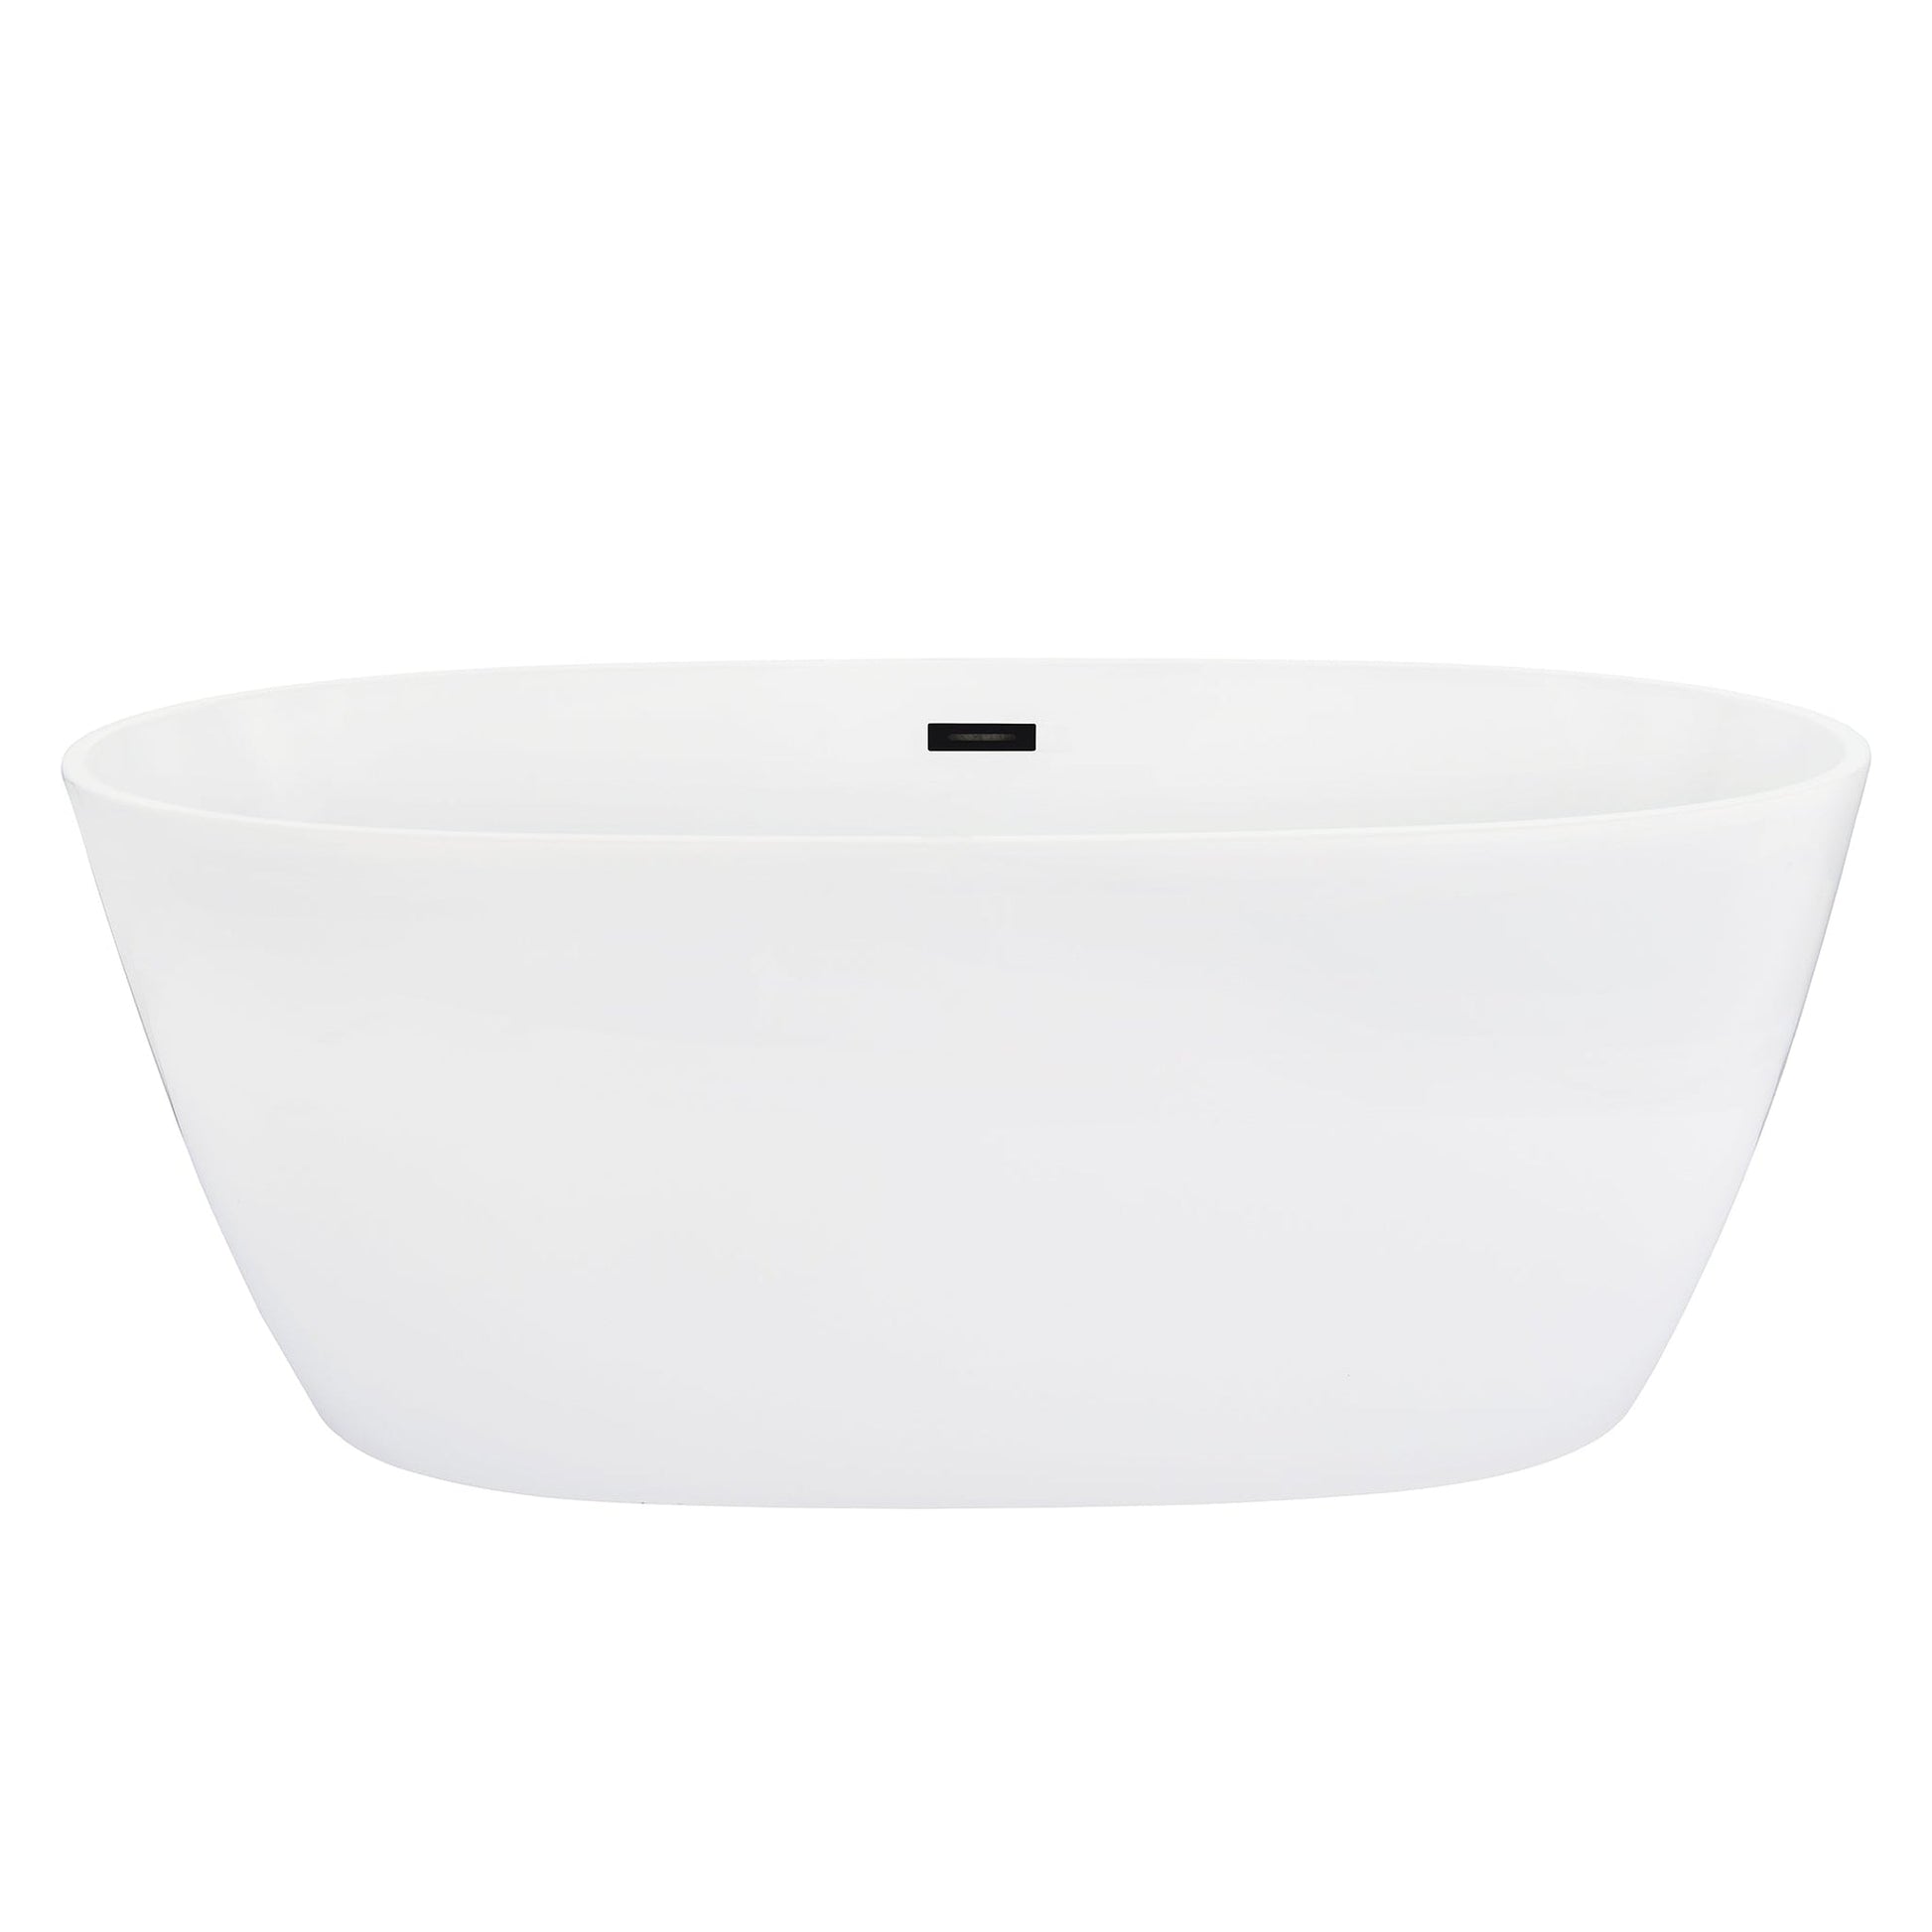 Altair Rauris 59" x 28" White Acrylic Freestanding Bathtub With Drain and Overflow